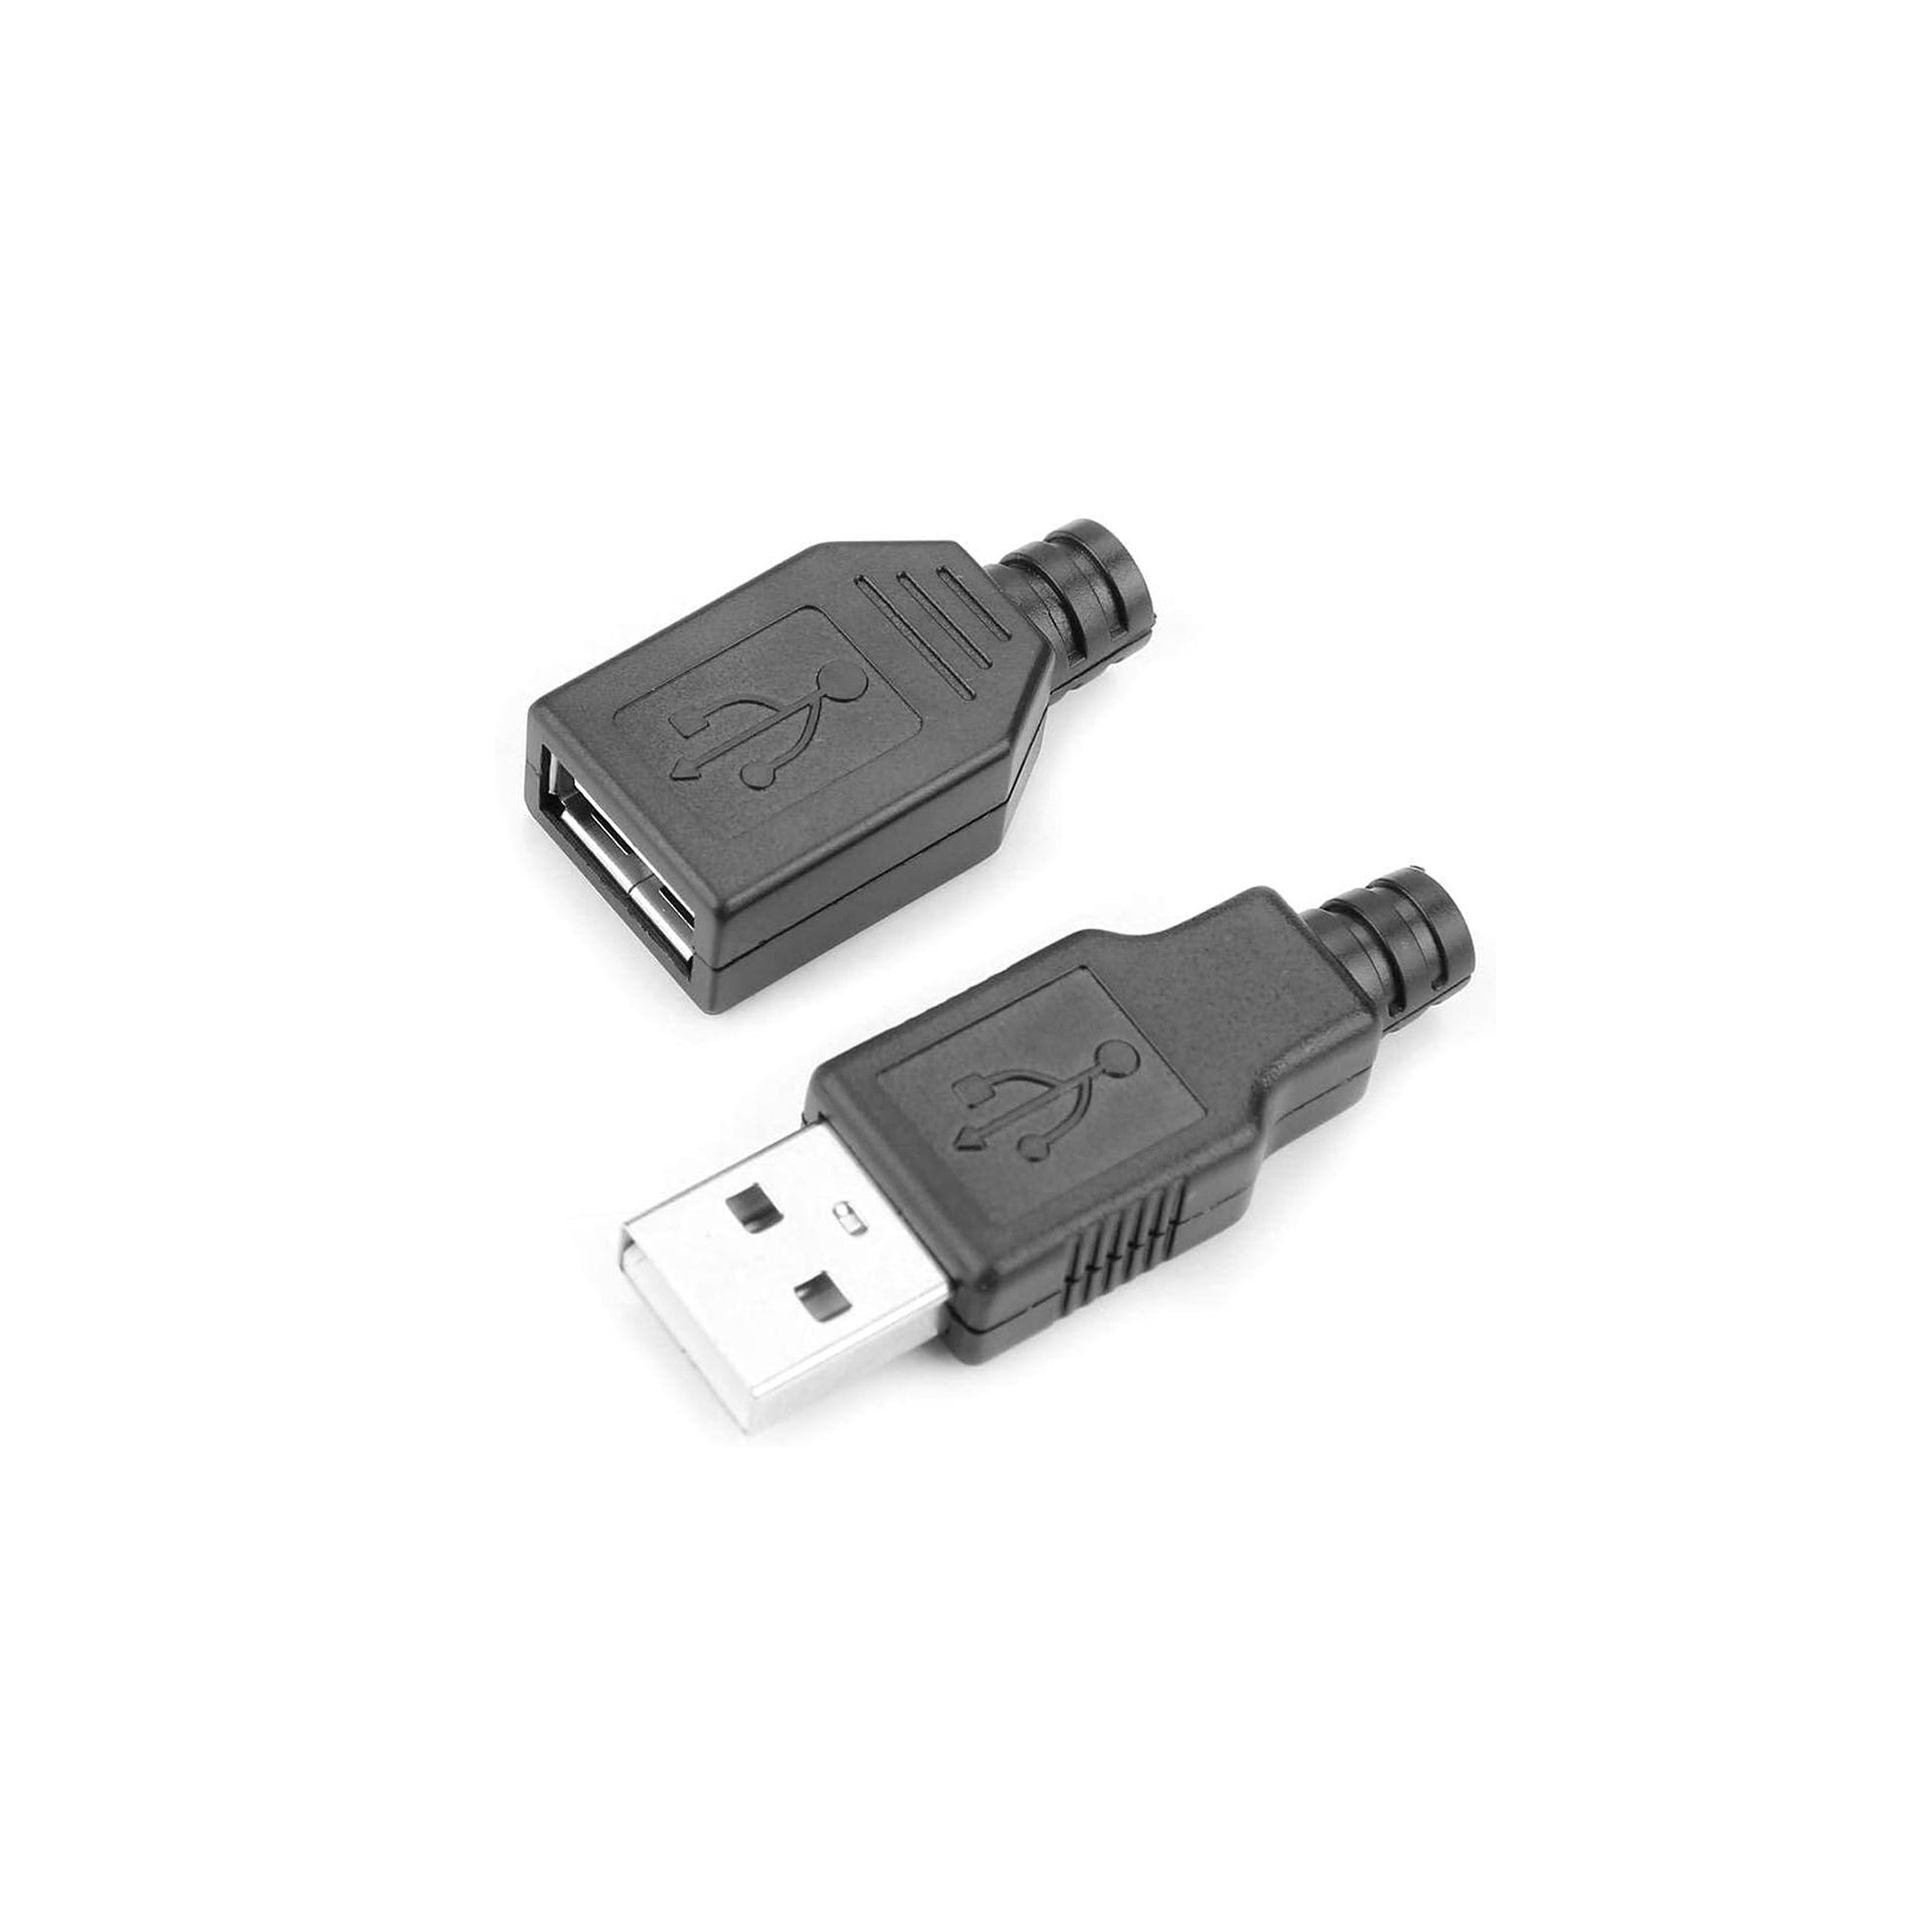 20 Pairs Premium USB Connector with Shell Type-A Male(10Pairs) and Type-A A 2.0 Female (10Pairs) 4 Pin Plug Connectors Assorted USB Connector Kit - RS1139 - REES52